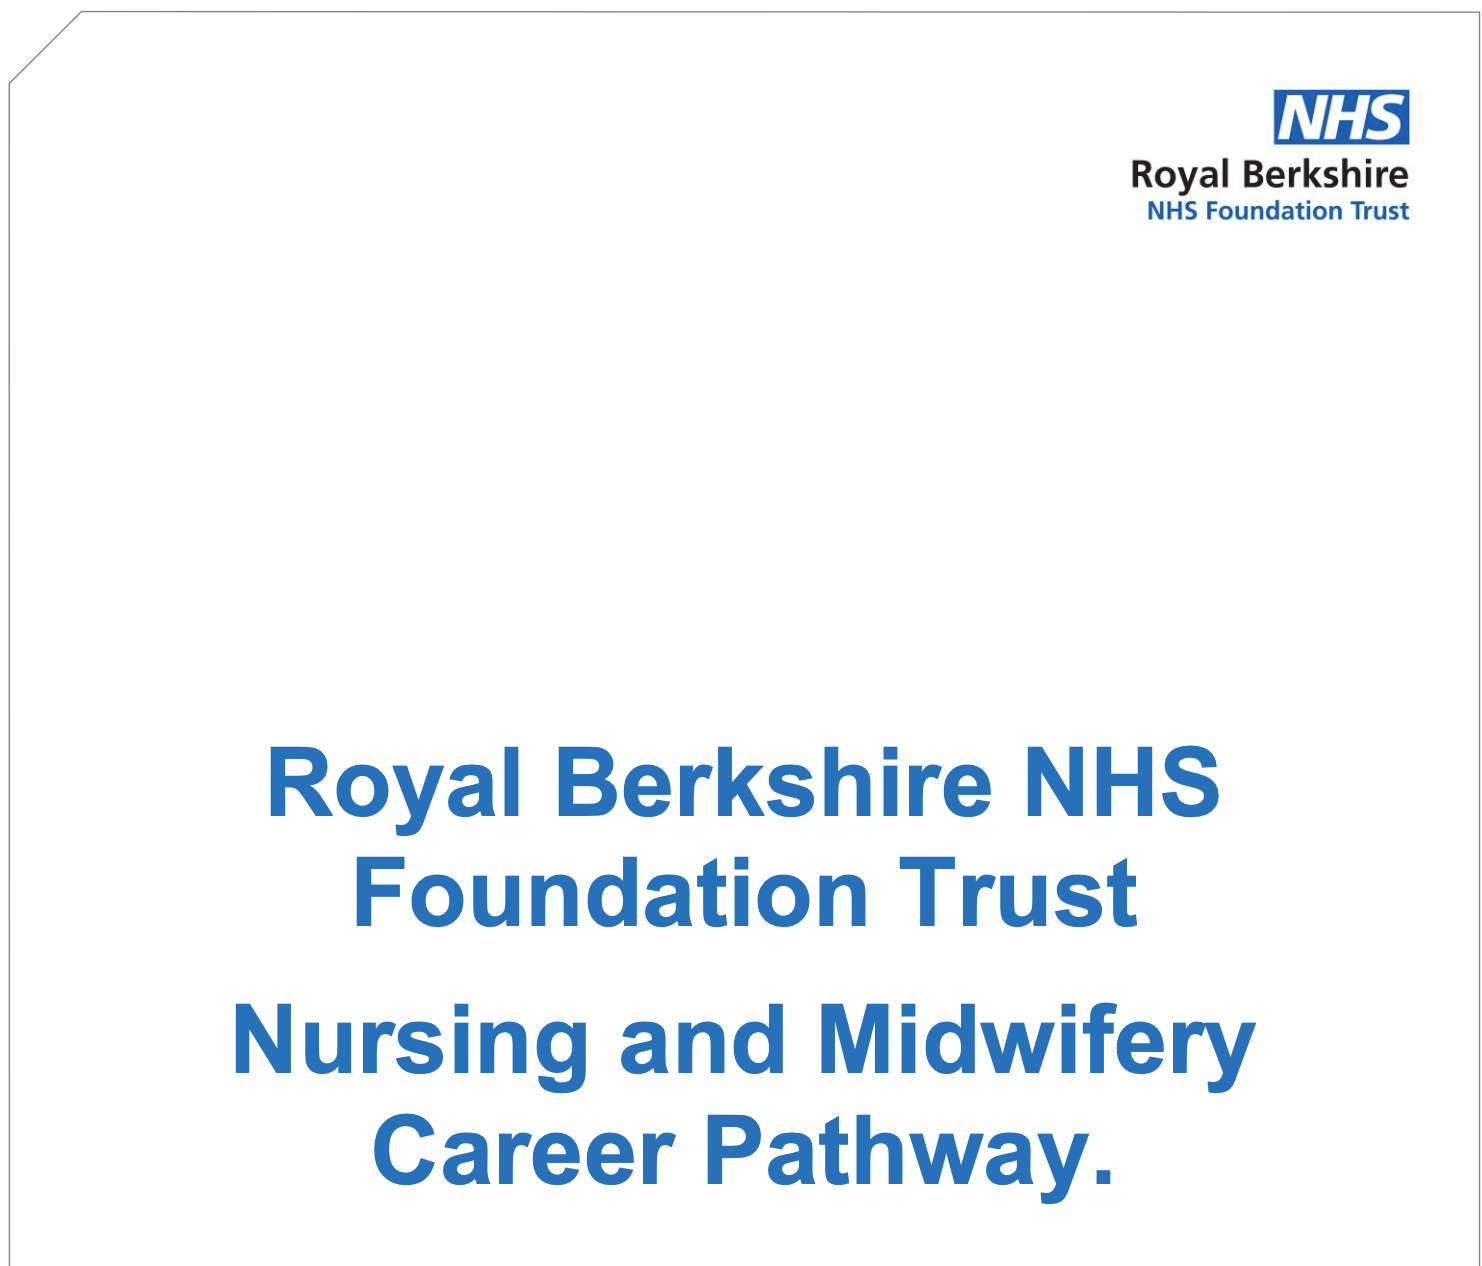 Nursing and Midwifery Career Pathway - Royal Berkshire NHS FT Trust featured image